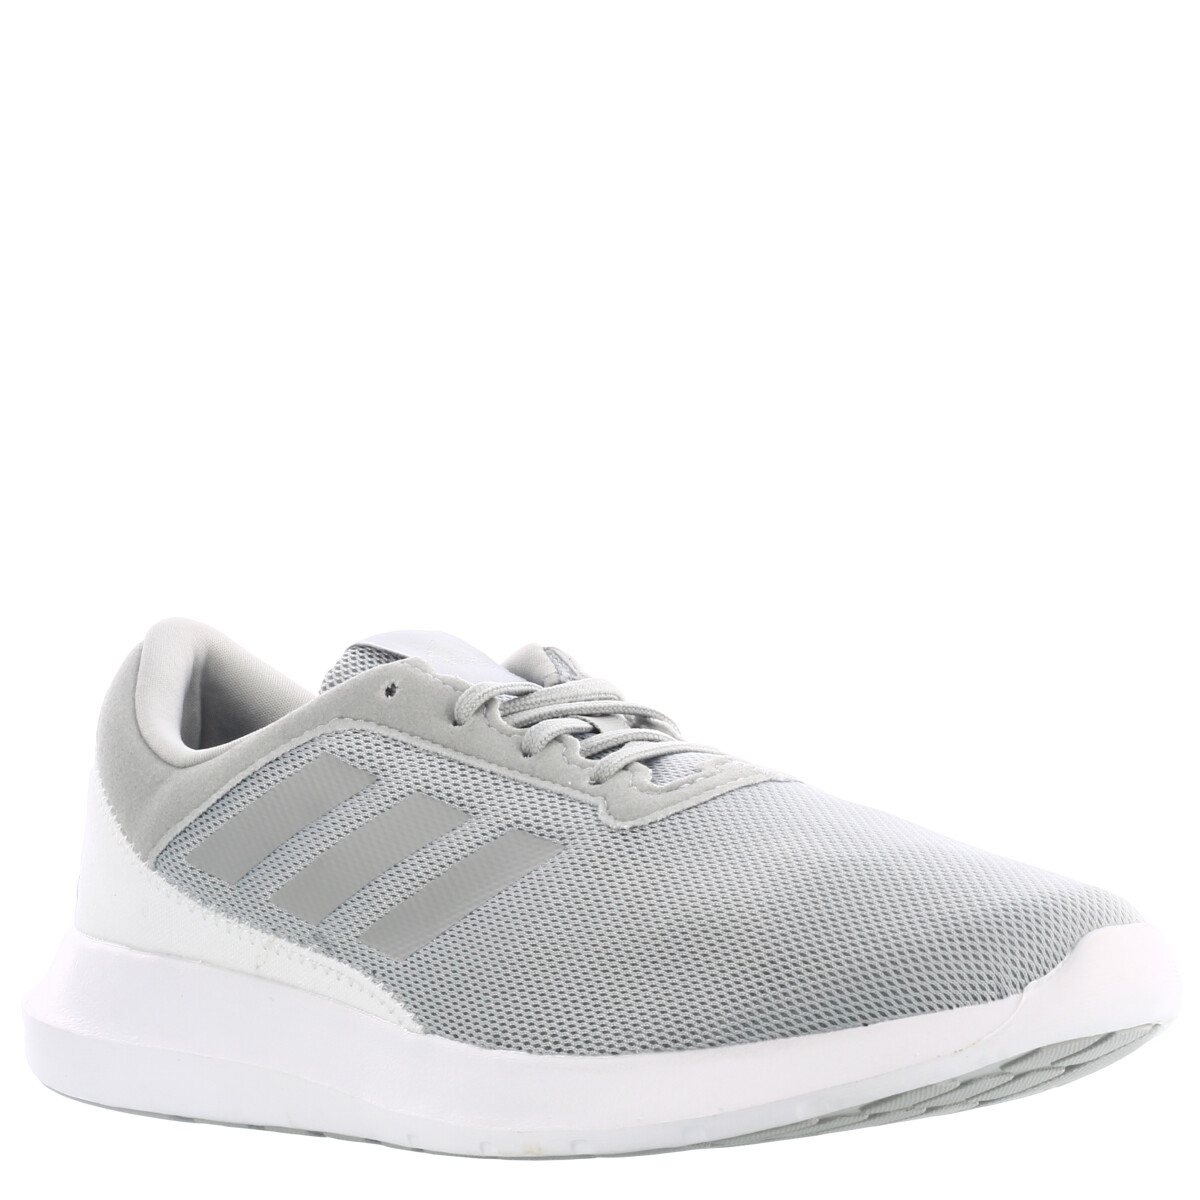 Core Racer Wns Adidas - Gris/Blanco 